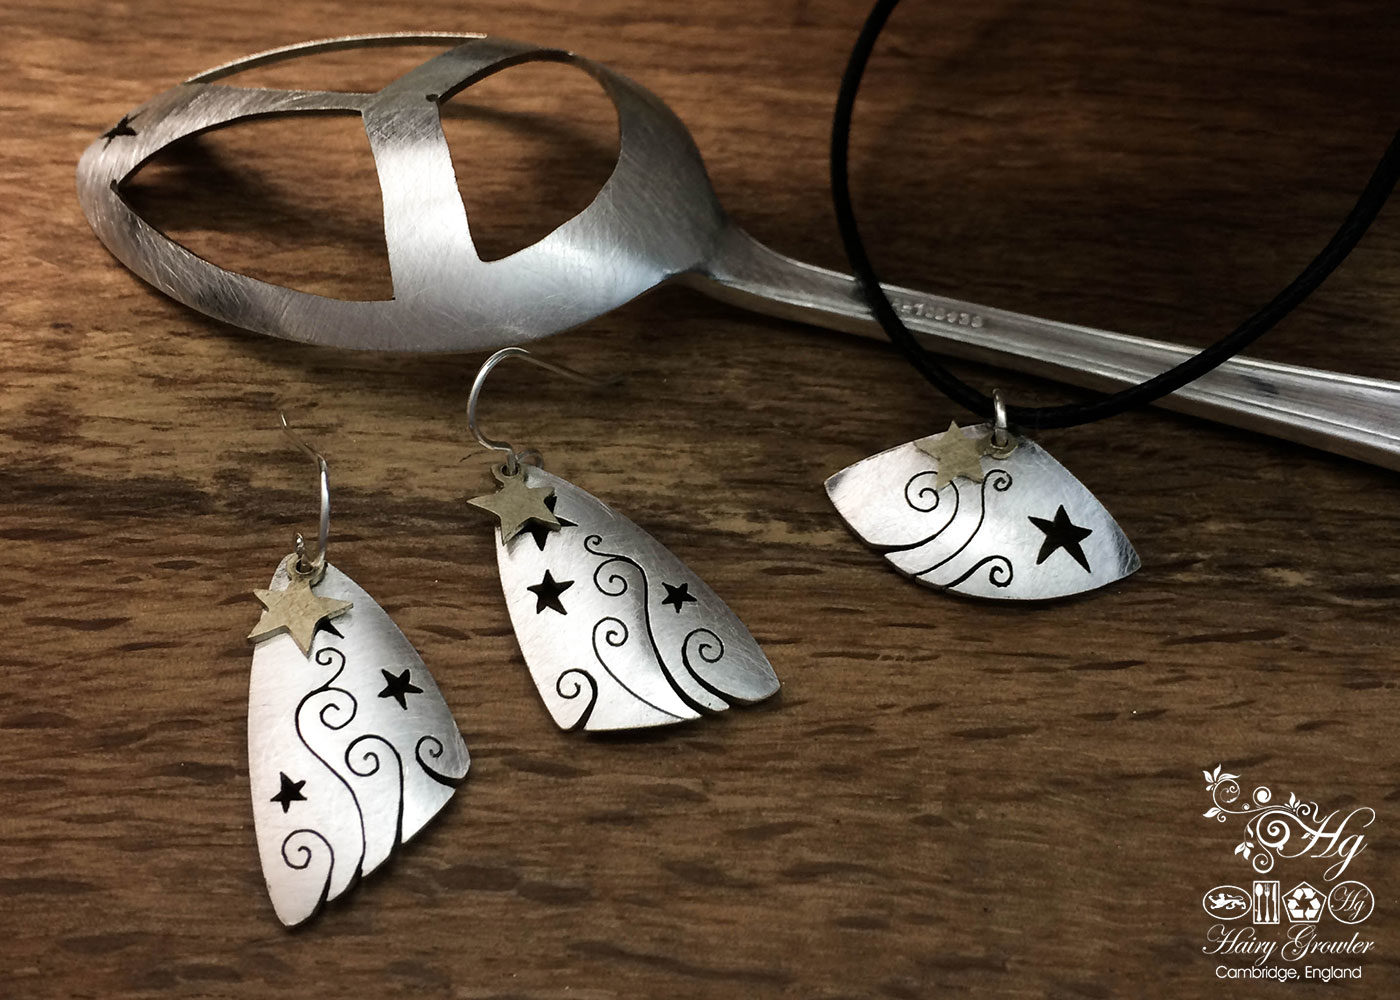 handcrafted and recycled spoon shooting and swirling star earrings